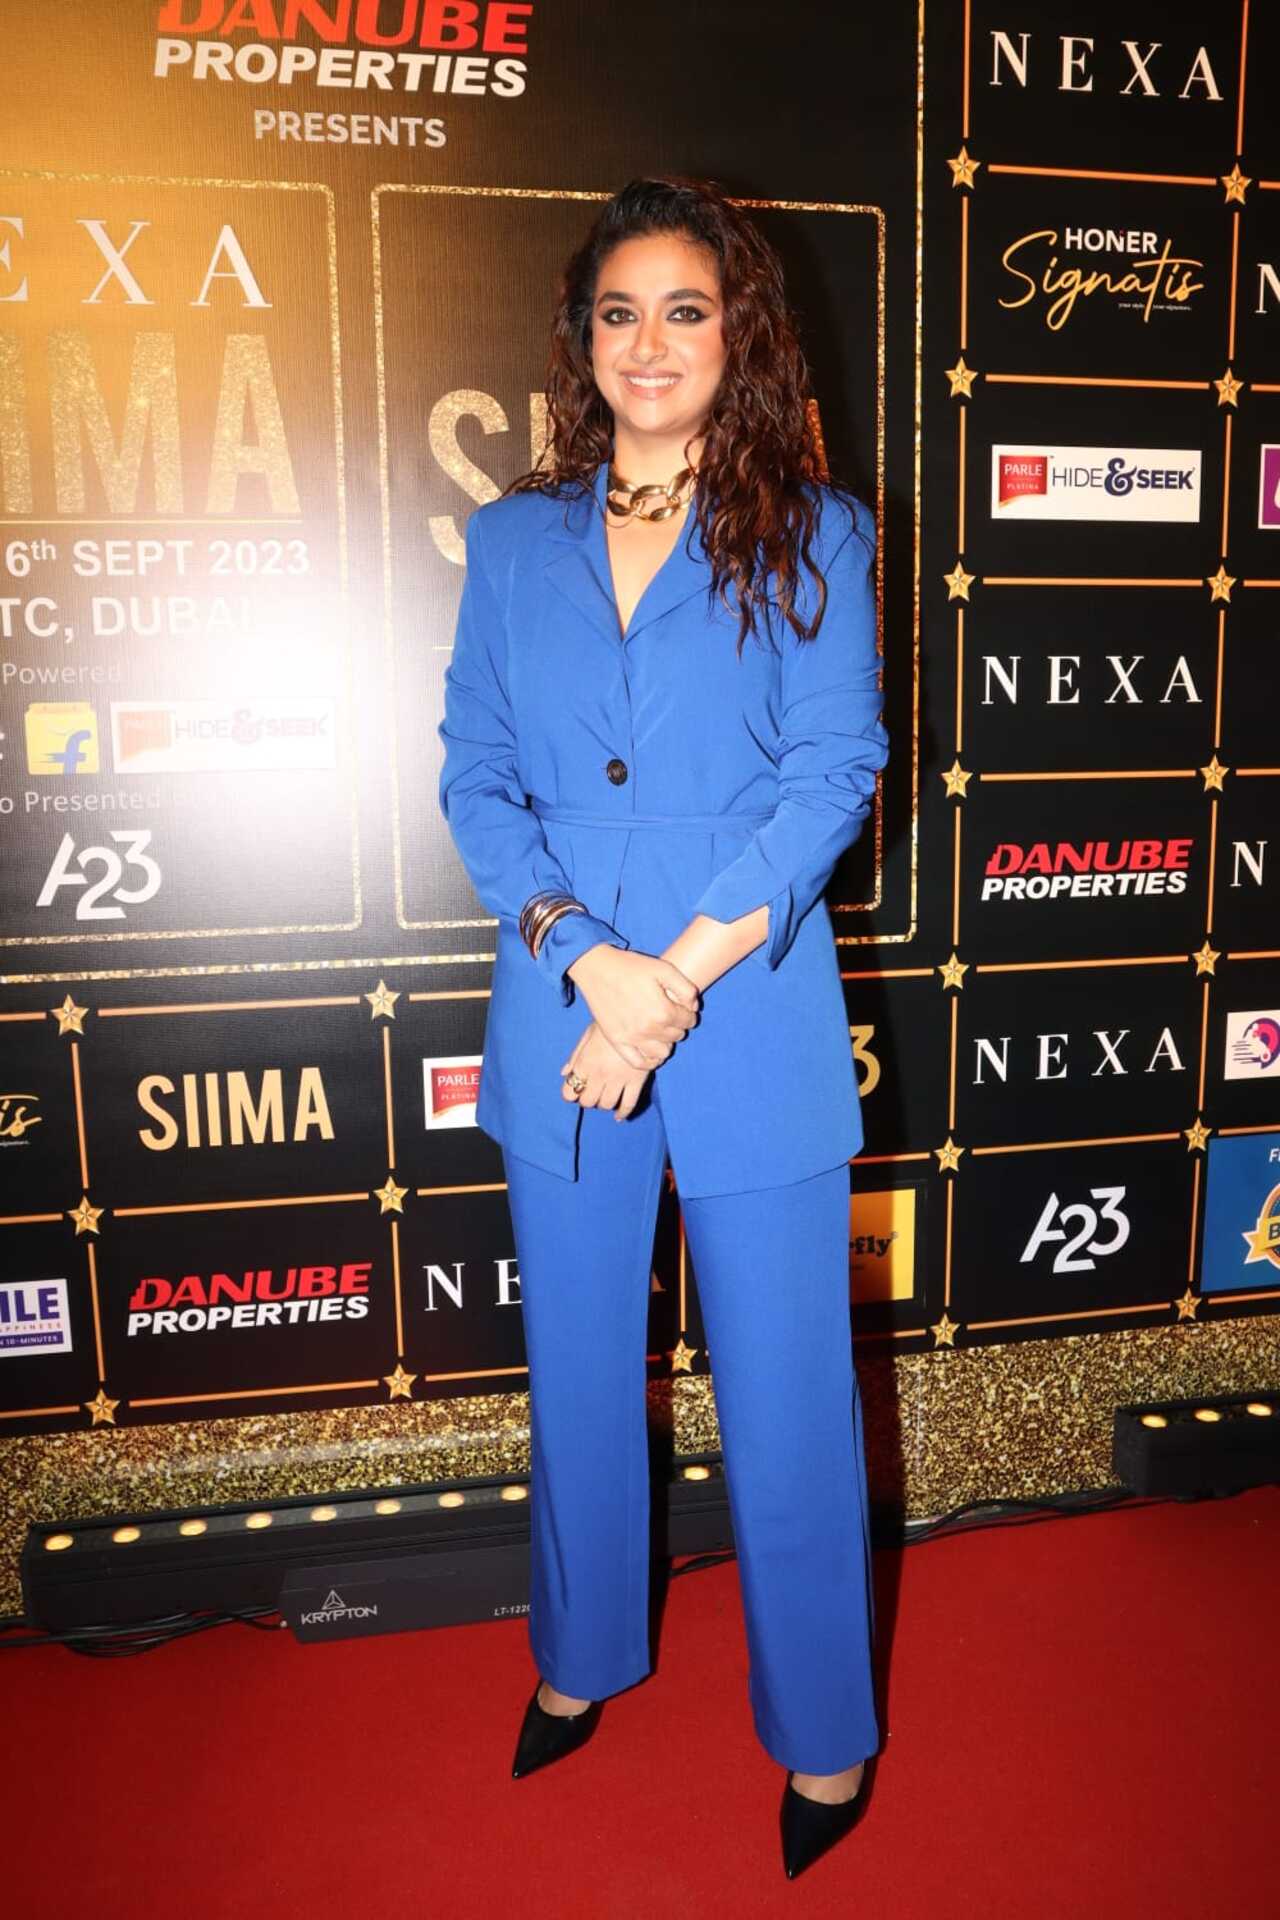 Keerthy Suresh channeled her boss lady vibes in a sky-blue suit and bold eye makeup. She won the Best Actress Critics for her performance in the Tamil film 'Saani Kaayidham'